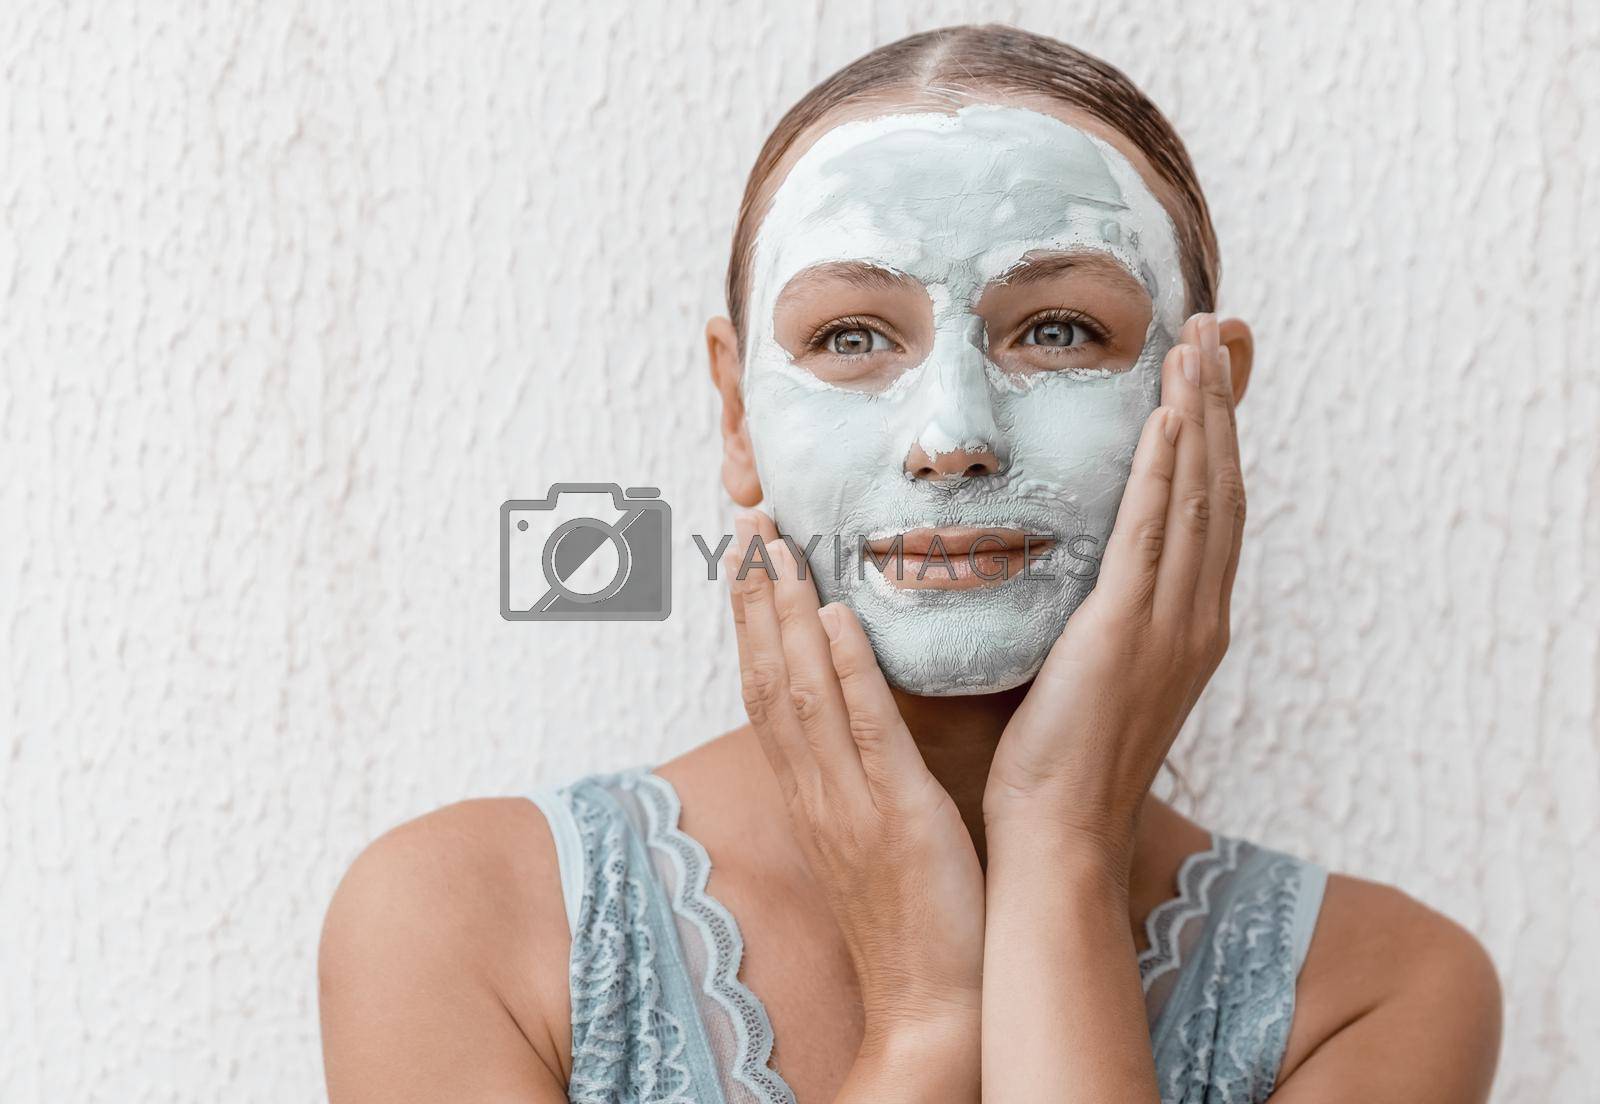 Royalty free image of Skin Care Concept by Anna_Omelchenko